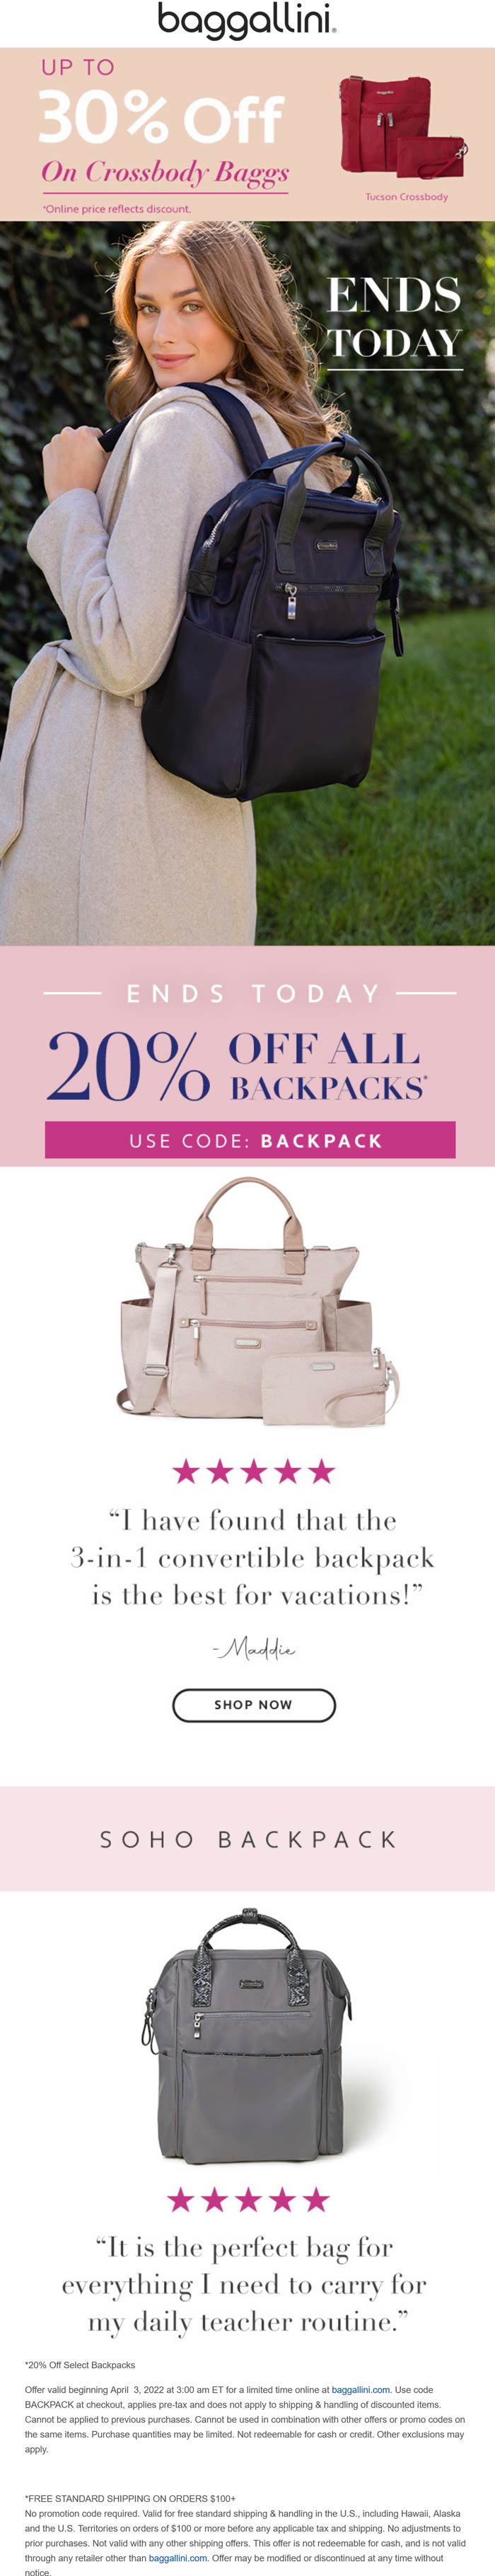 Baggallini stores Coupon  20% off backpacks today at Baggallini via promo code BACKPACK #baggallini 